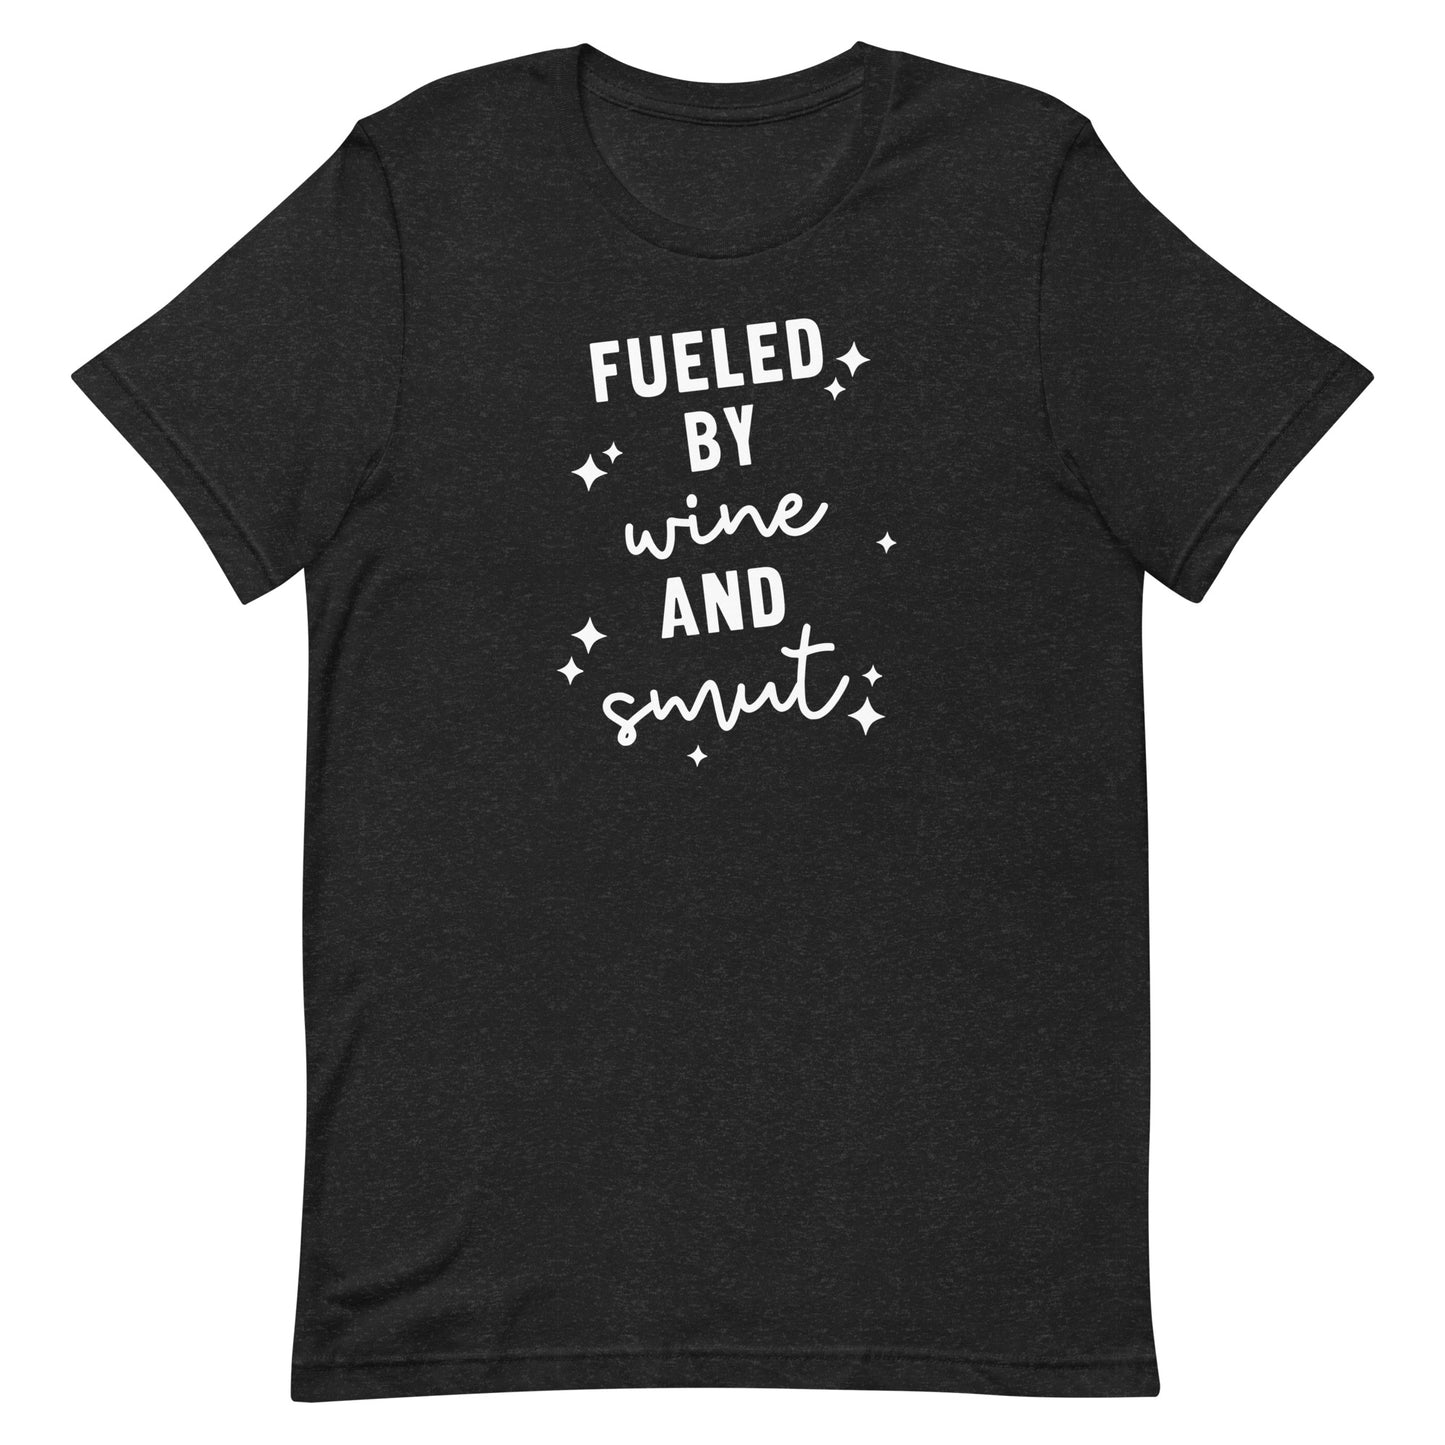 Fueled By Wine and Smut Tee